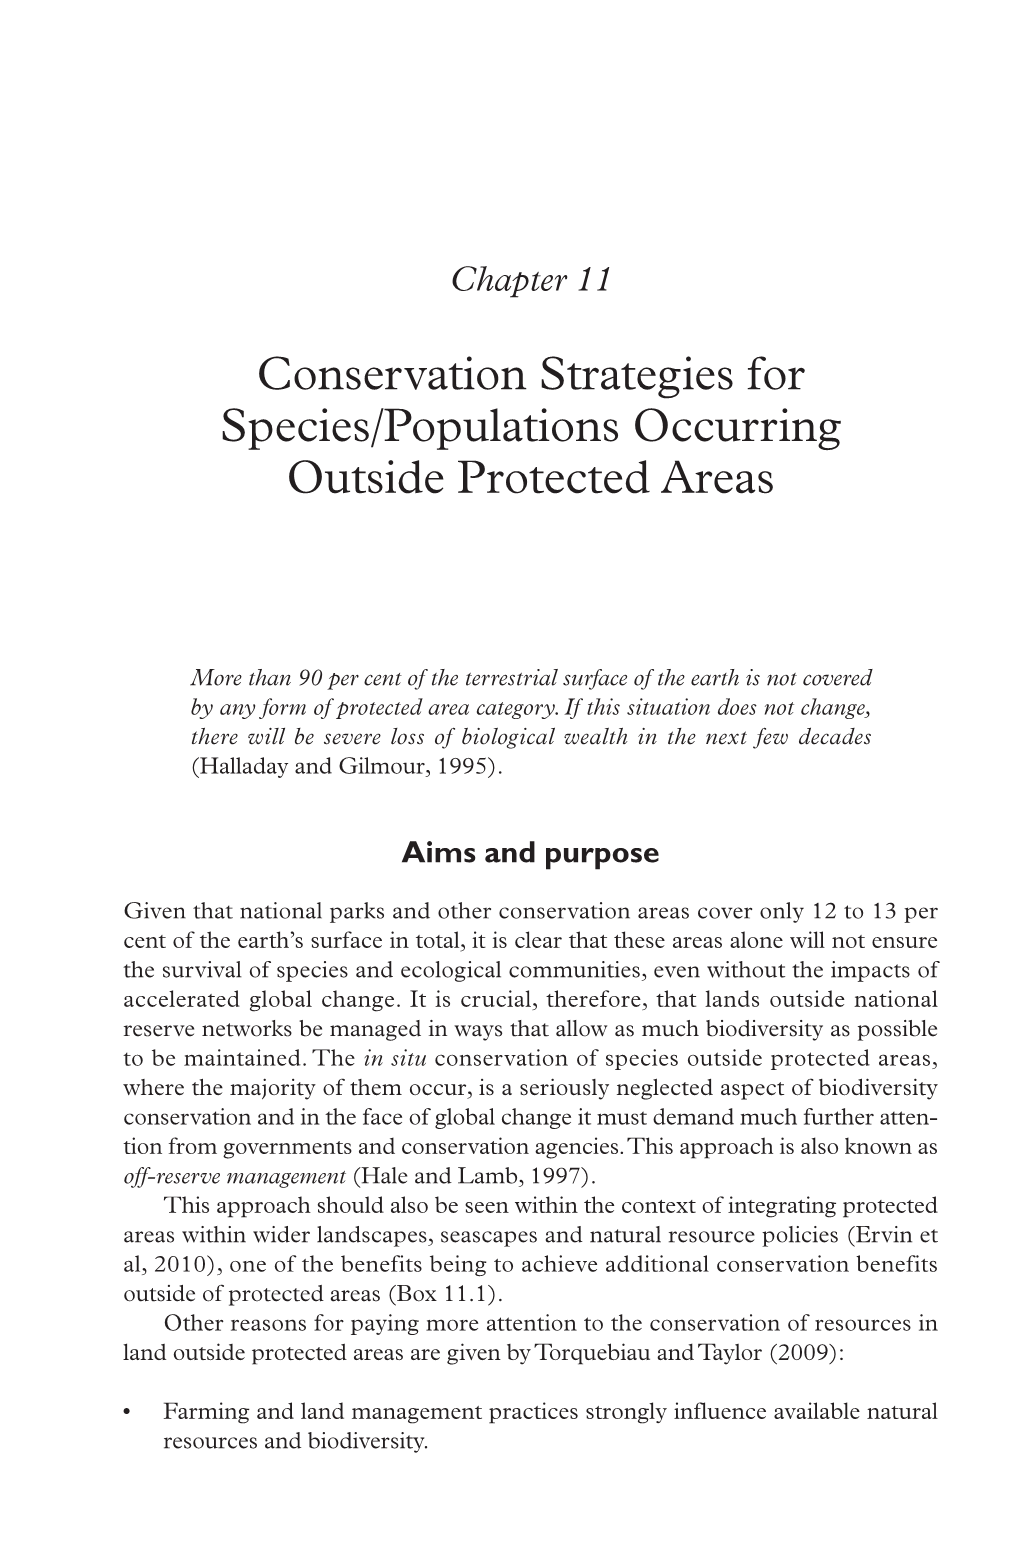 Conservation Strategies for Species/Populations Occurring Outside Protected Areas